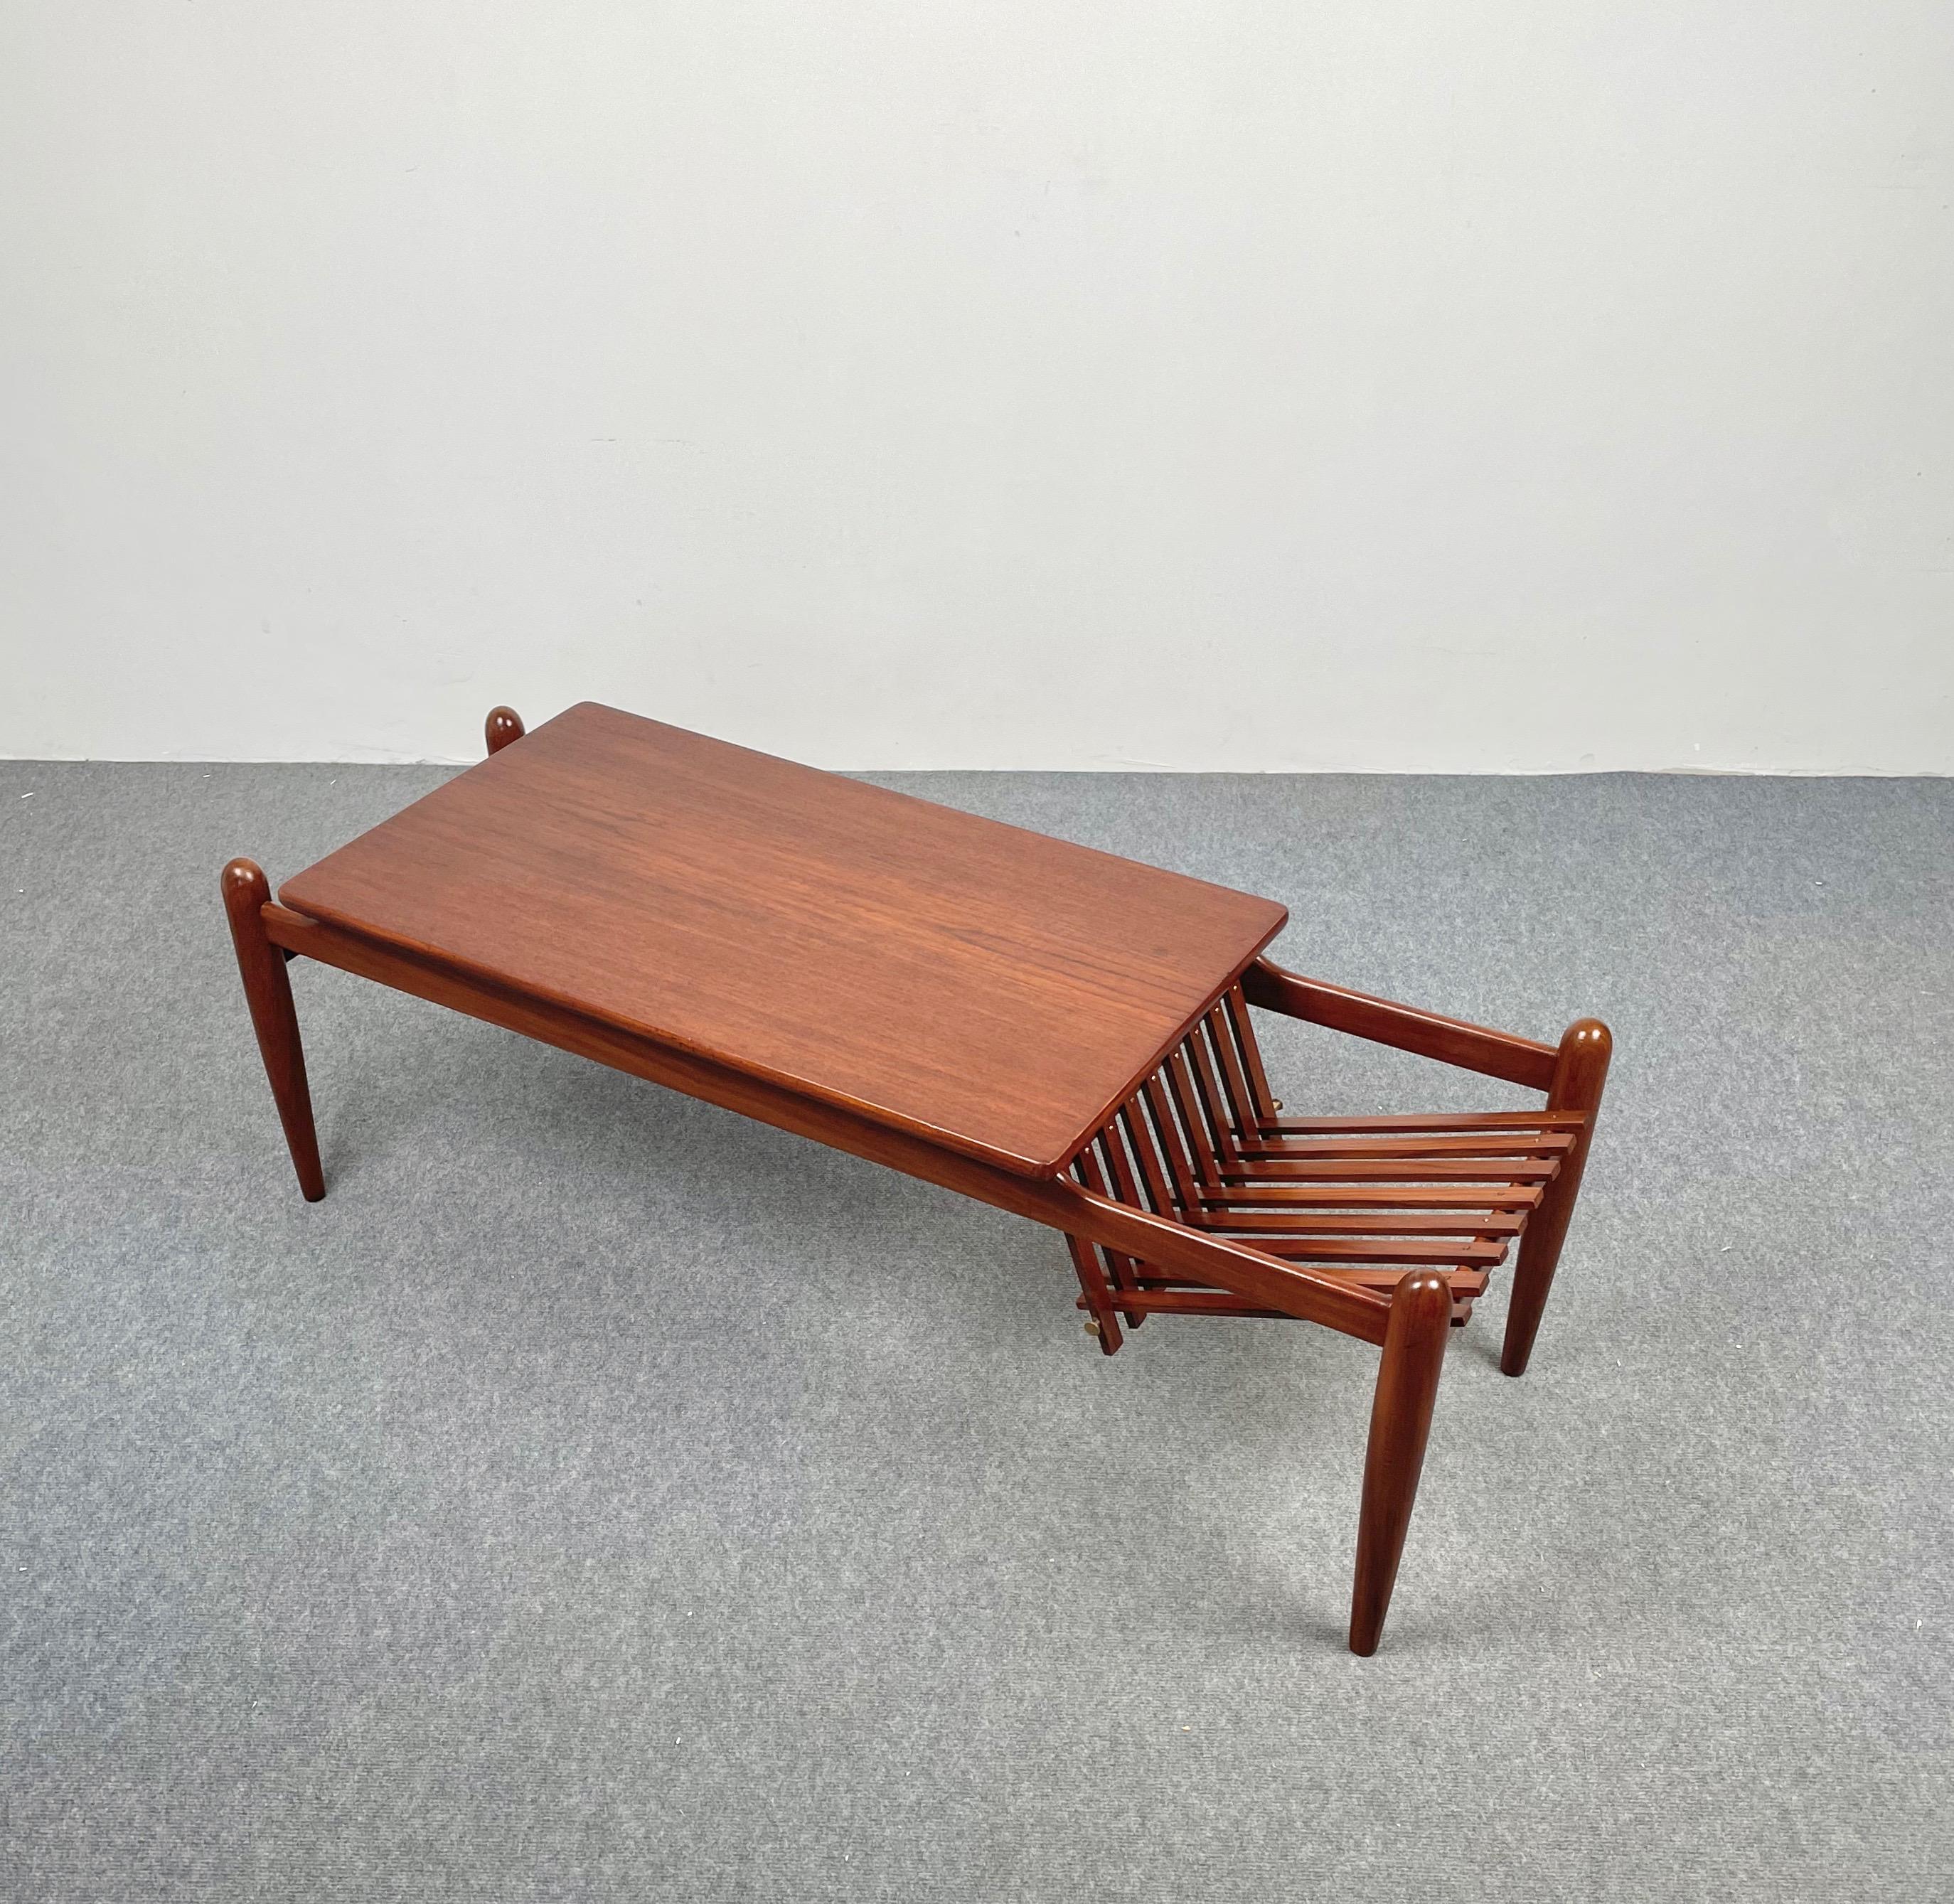 Coffee table and magazine rack in teak made in Italy in the 1970s. 
The magazine rack part features interlocking wooden slats connected by a brass pin.